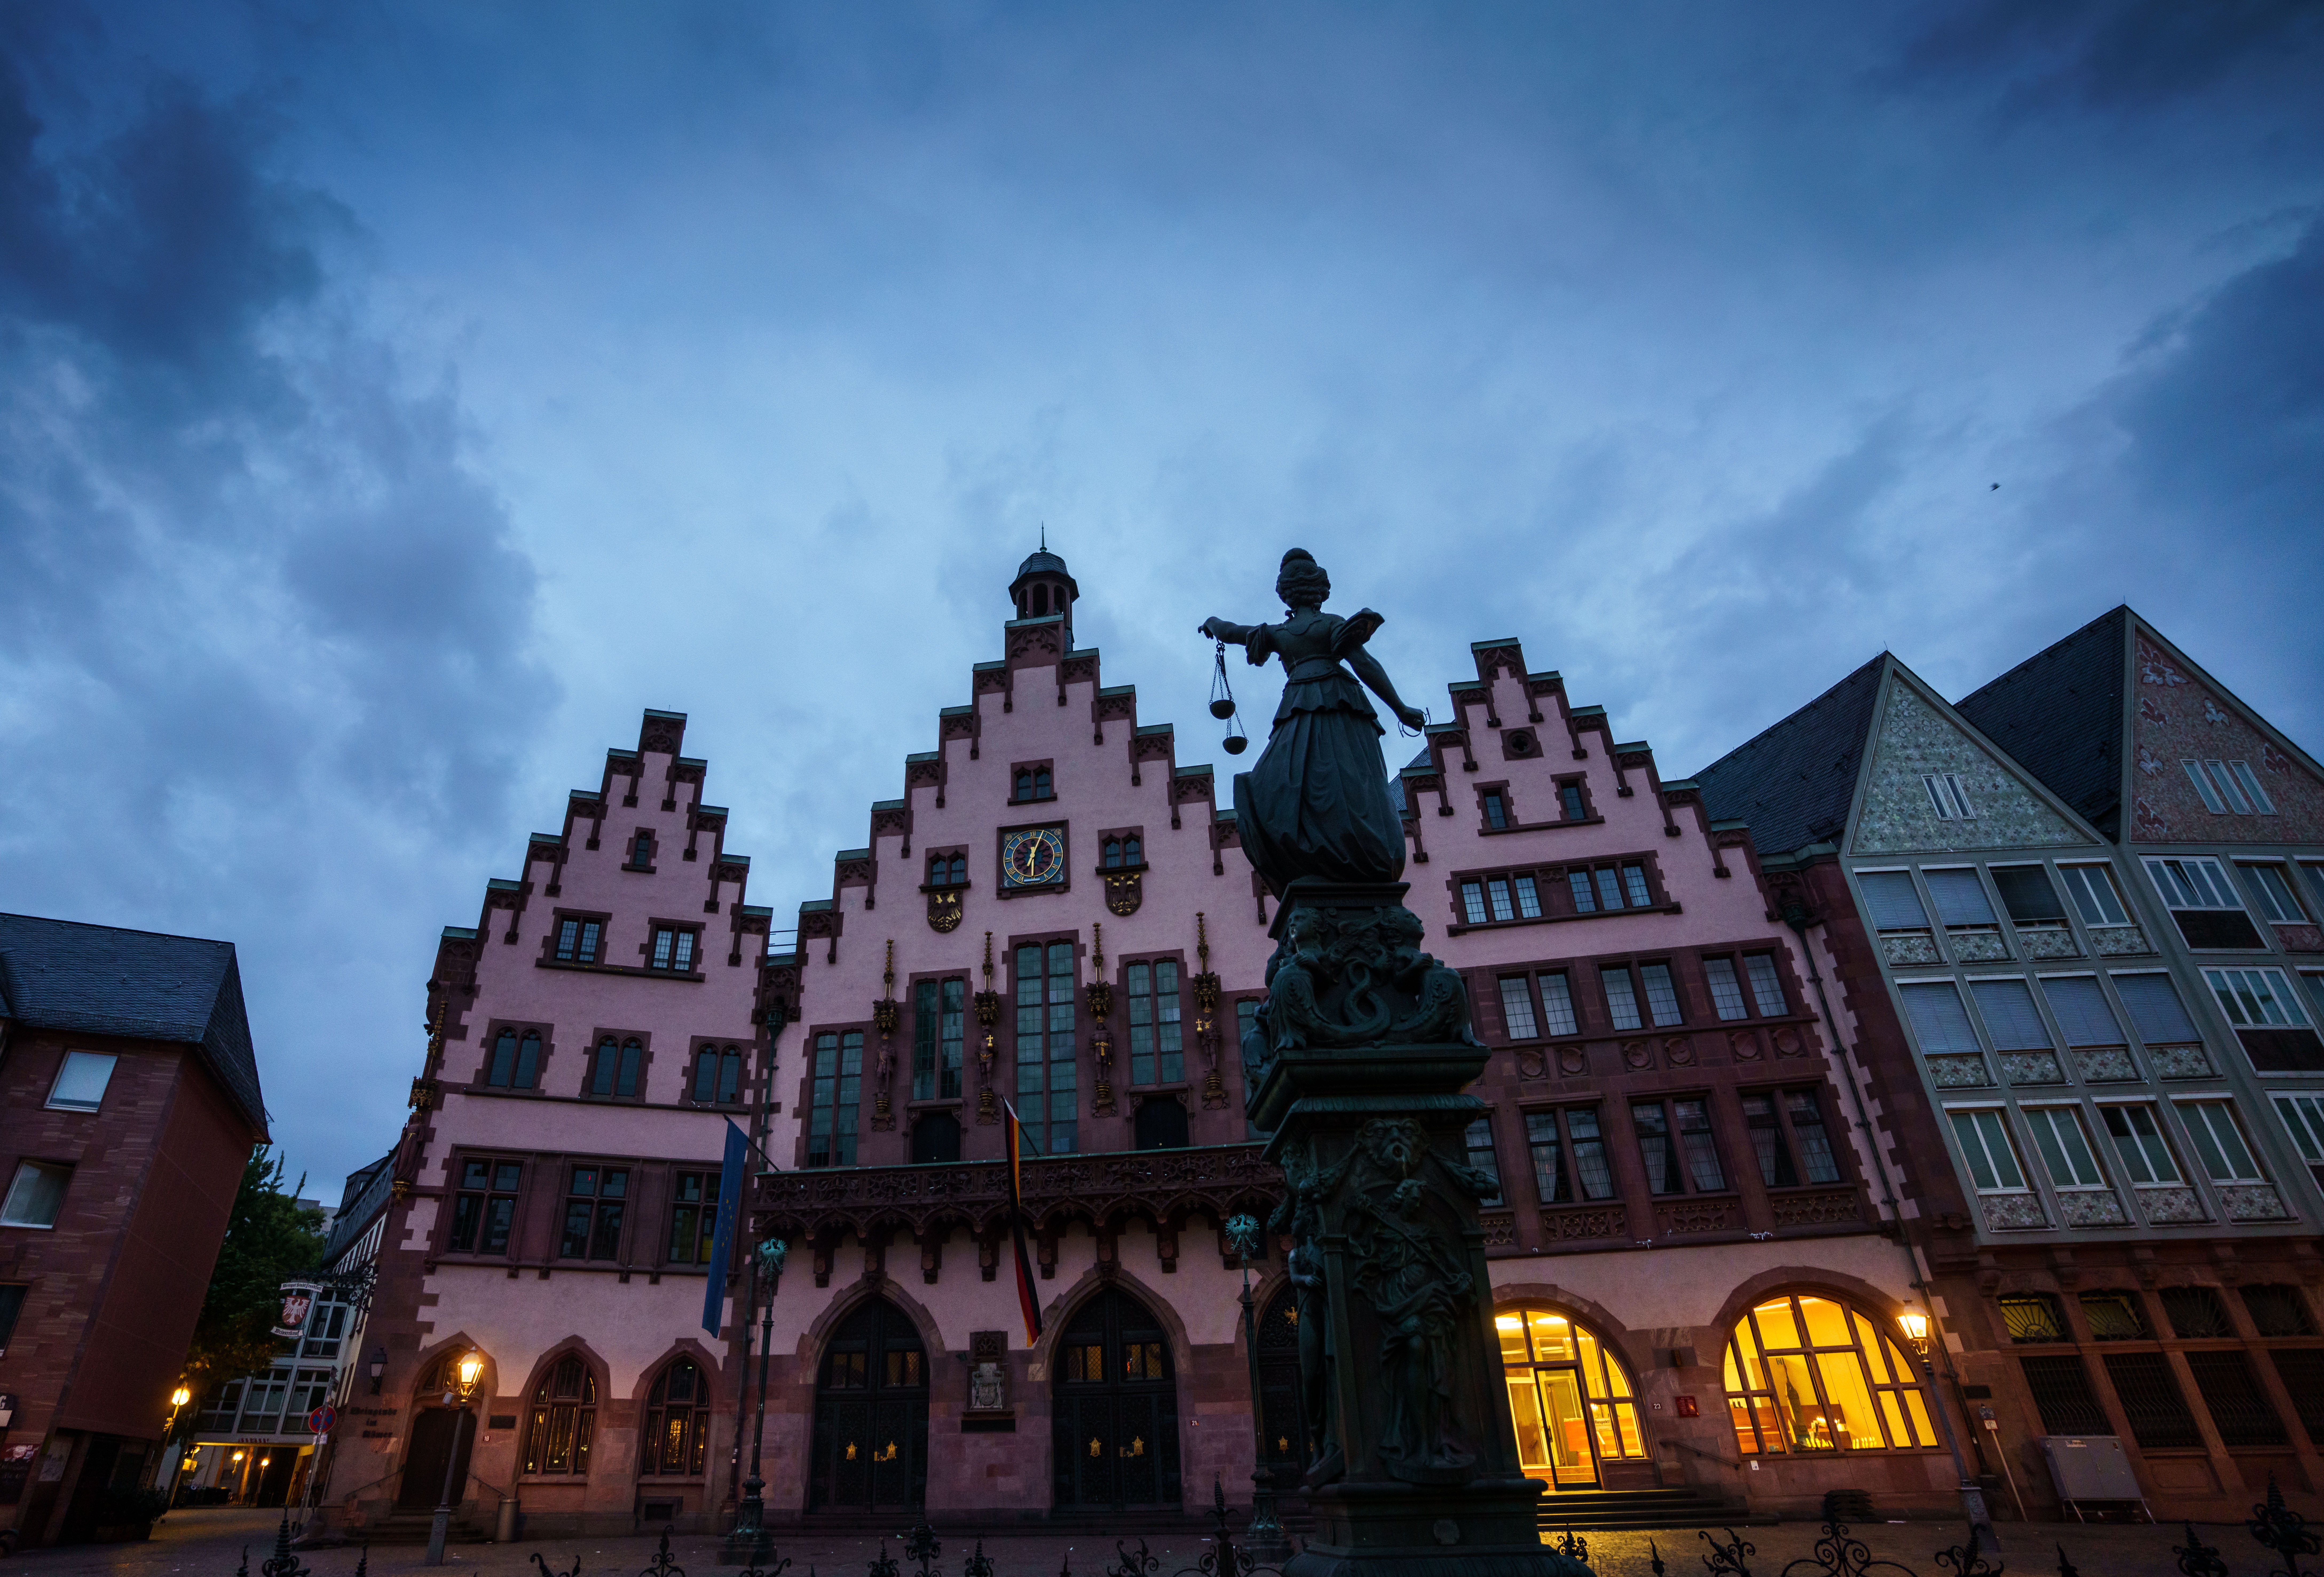 The façade of the Römer, Frankfurt's historic city hall, is not lit up to save energy.